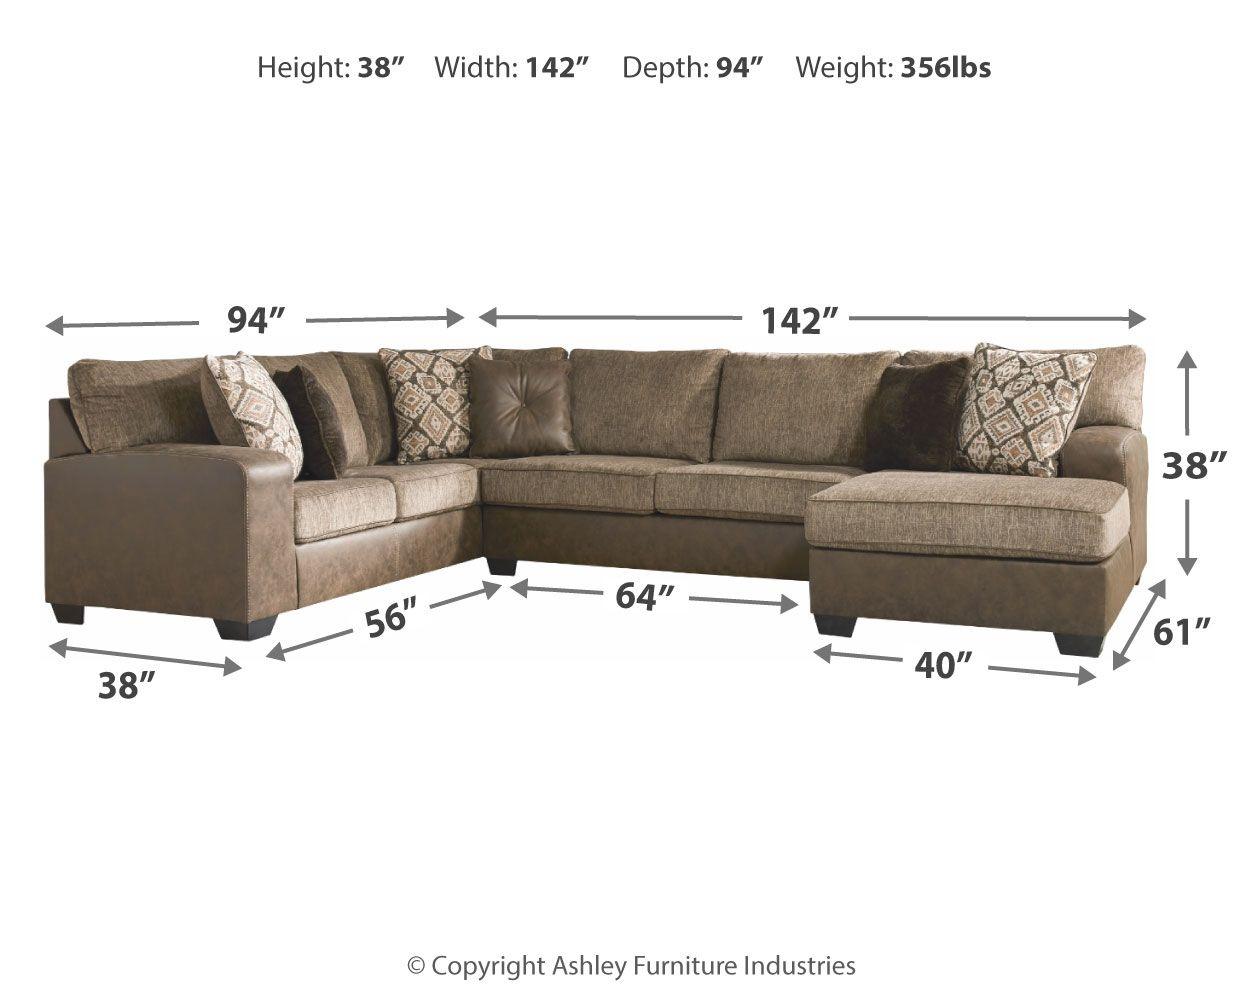 Benchcraft® - Abalone - Sectional - 5th Avenue Furniture